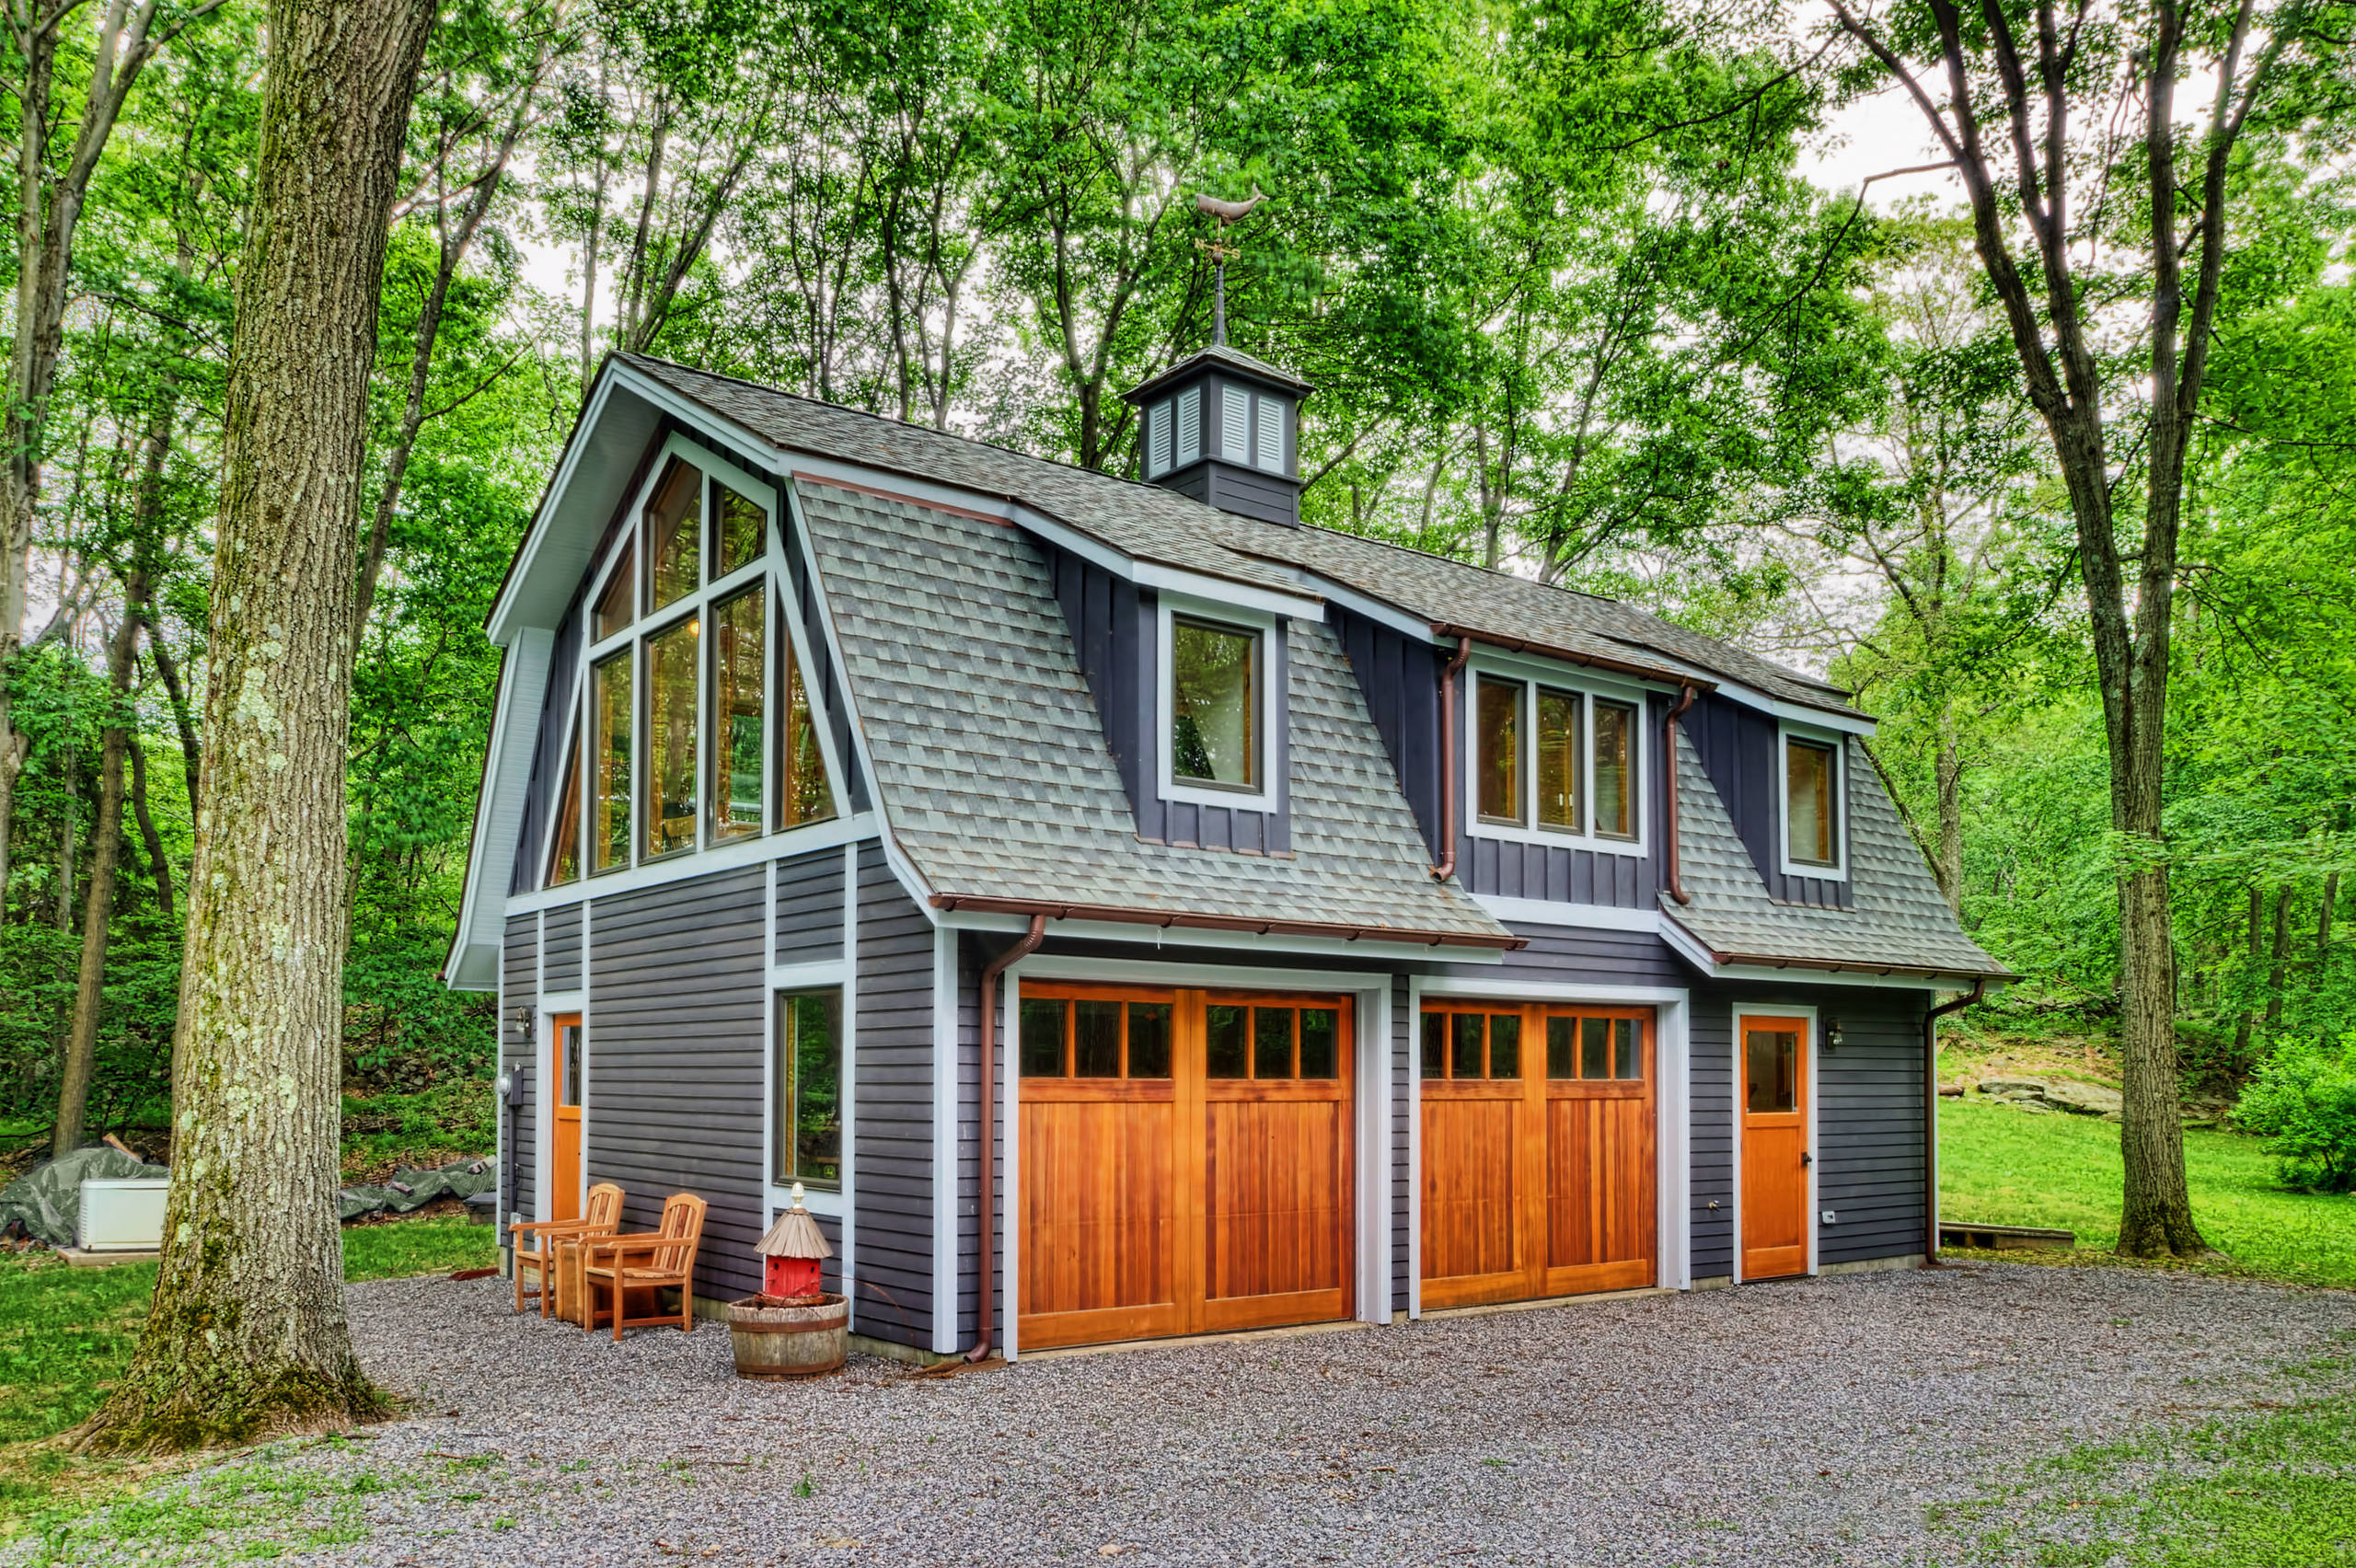 Engaging garage designs pictures 75 Beautiful Detached Garage Pictures Ideas July 2021 Houzz